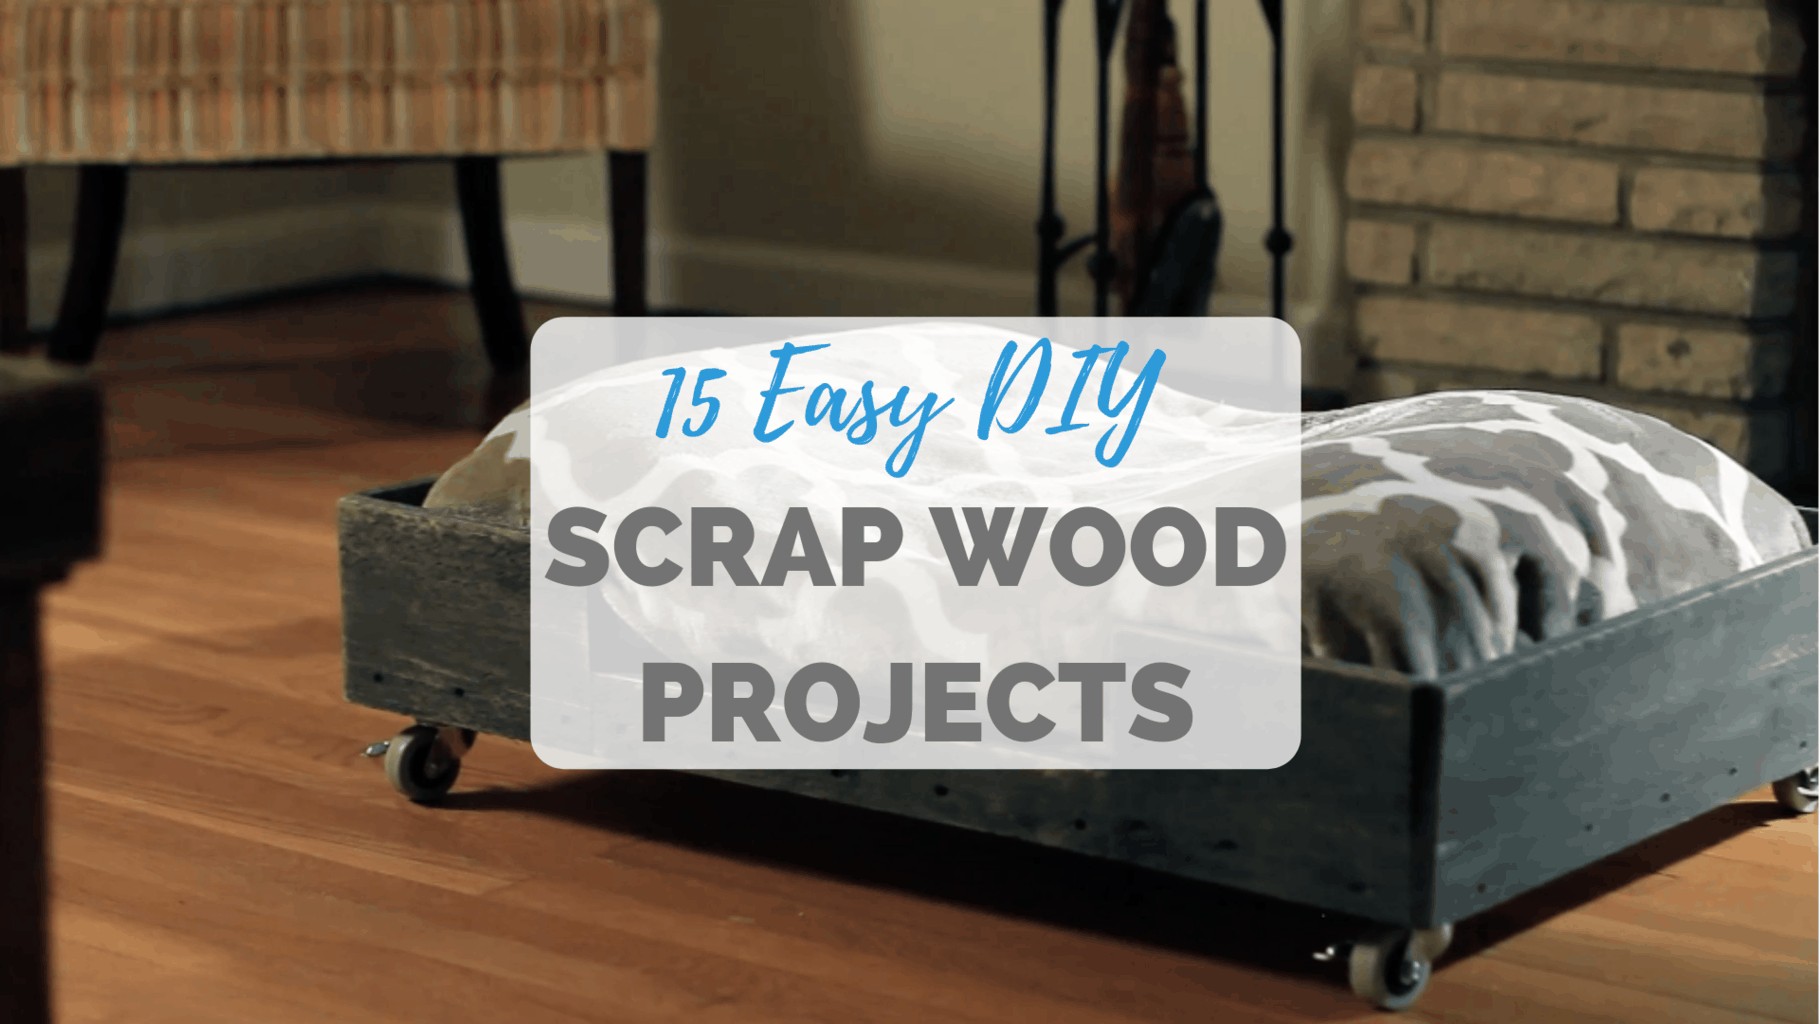 15 Easy Scrap Wood Projects The Saw Guy